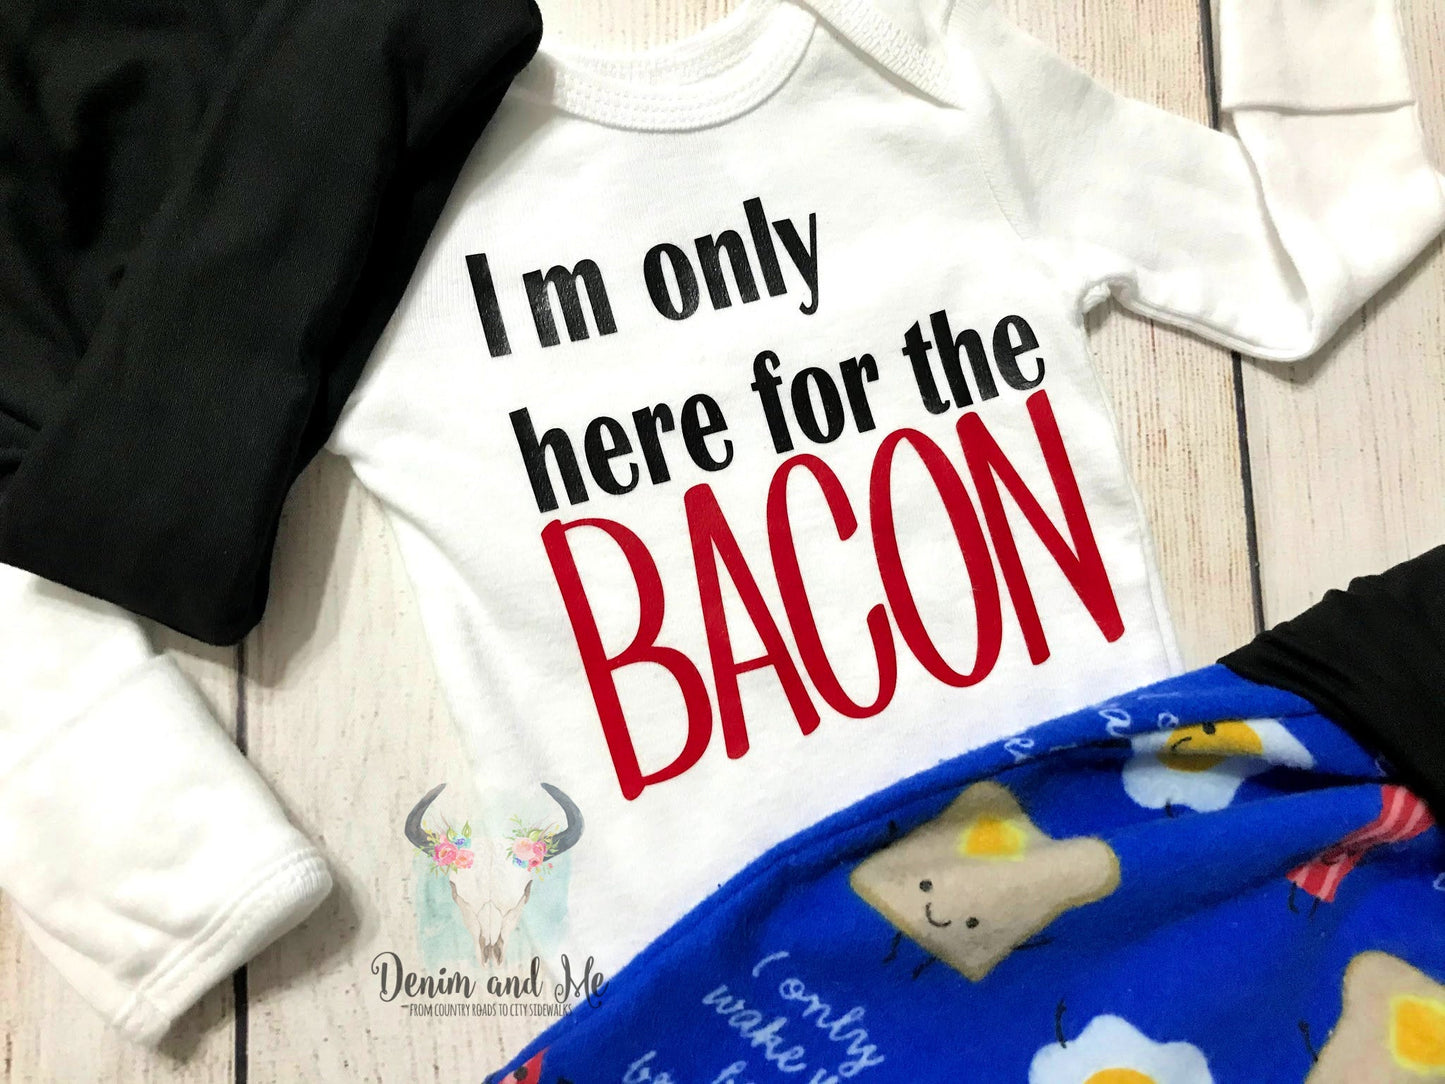 "I'm only here for the Bacon" Outfit